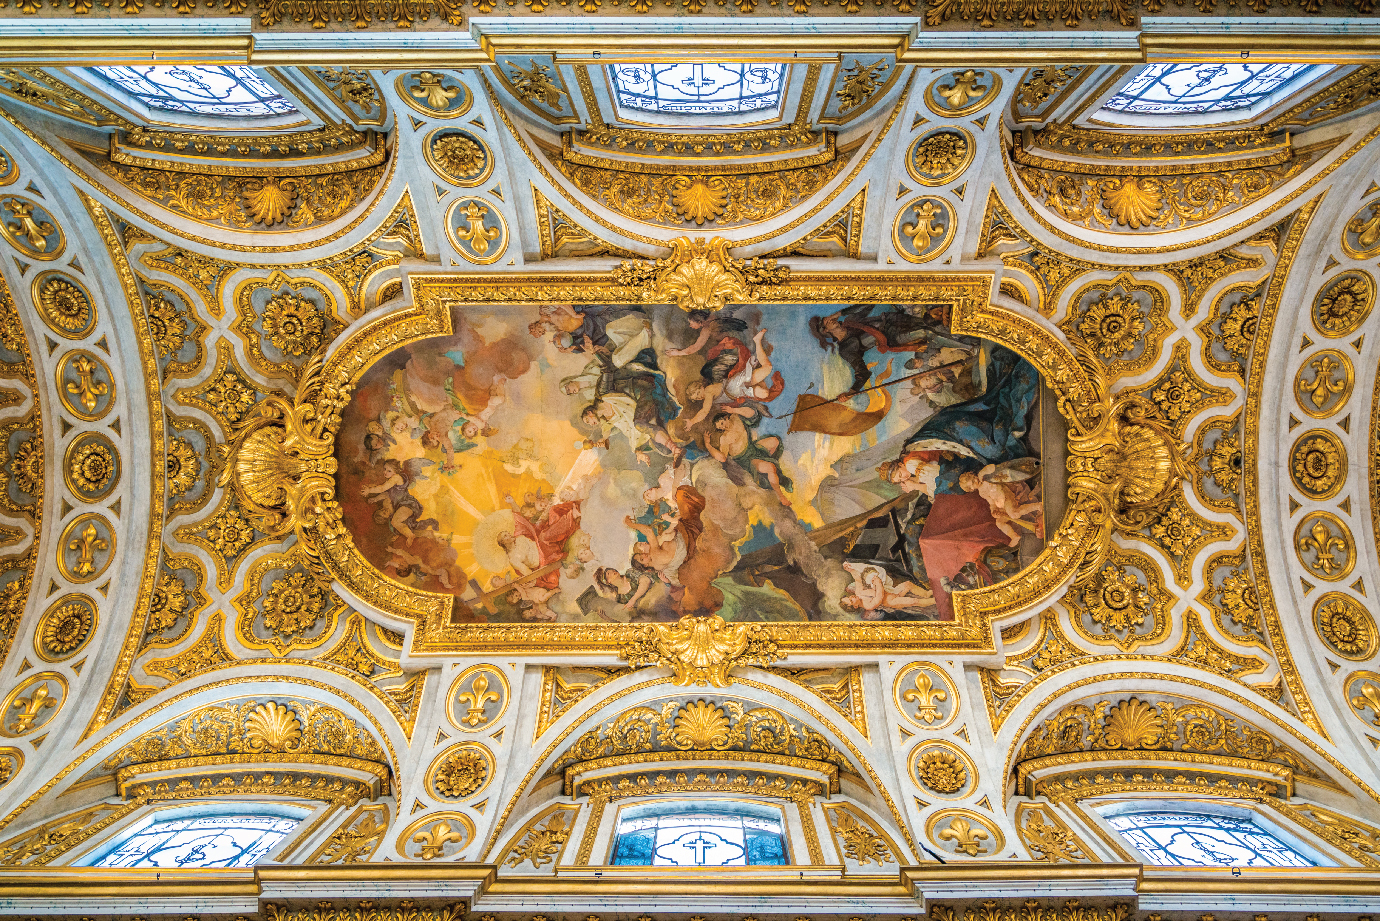 An ornate baroque-style ceiling